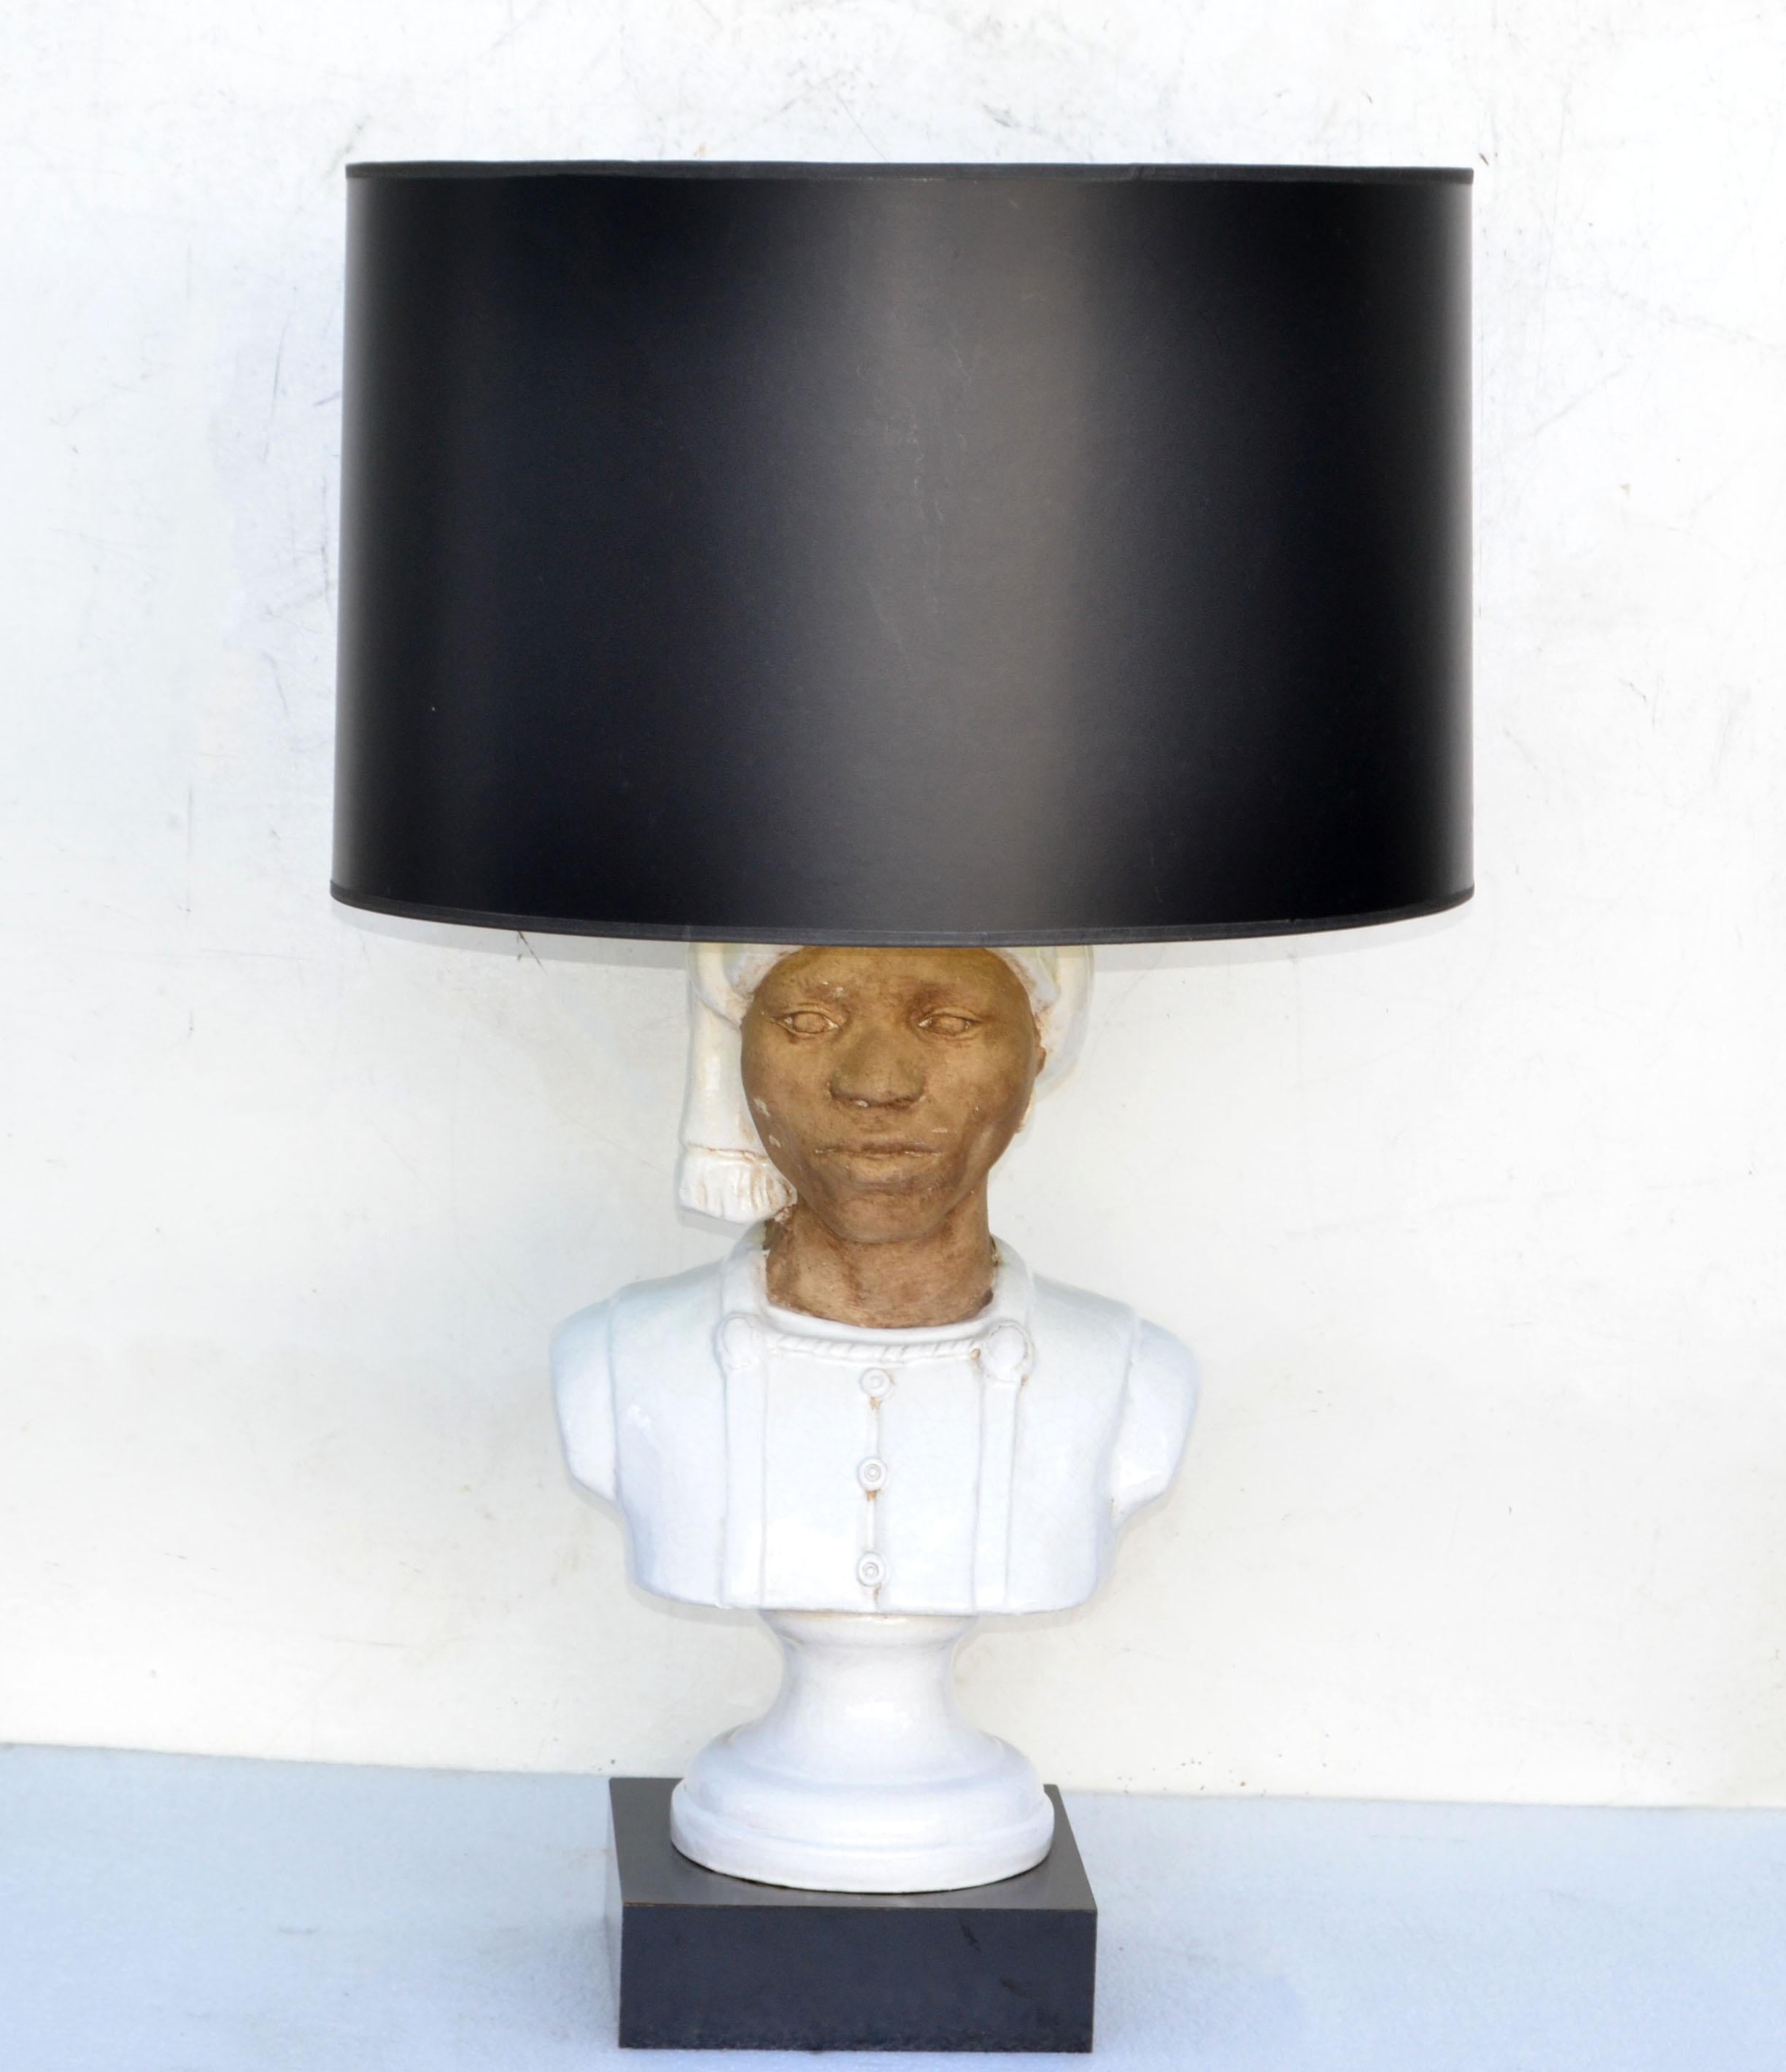 French Art Deco Bedouin Head Bust Terracotta, Glazed Ceramic & Wood Table Lamp, 1950 For Sale